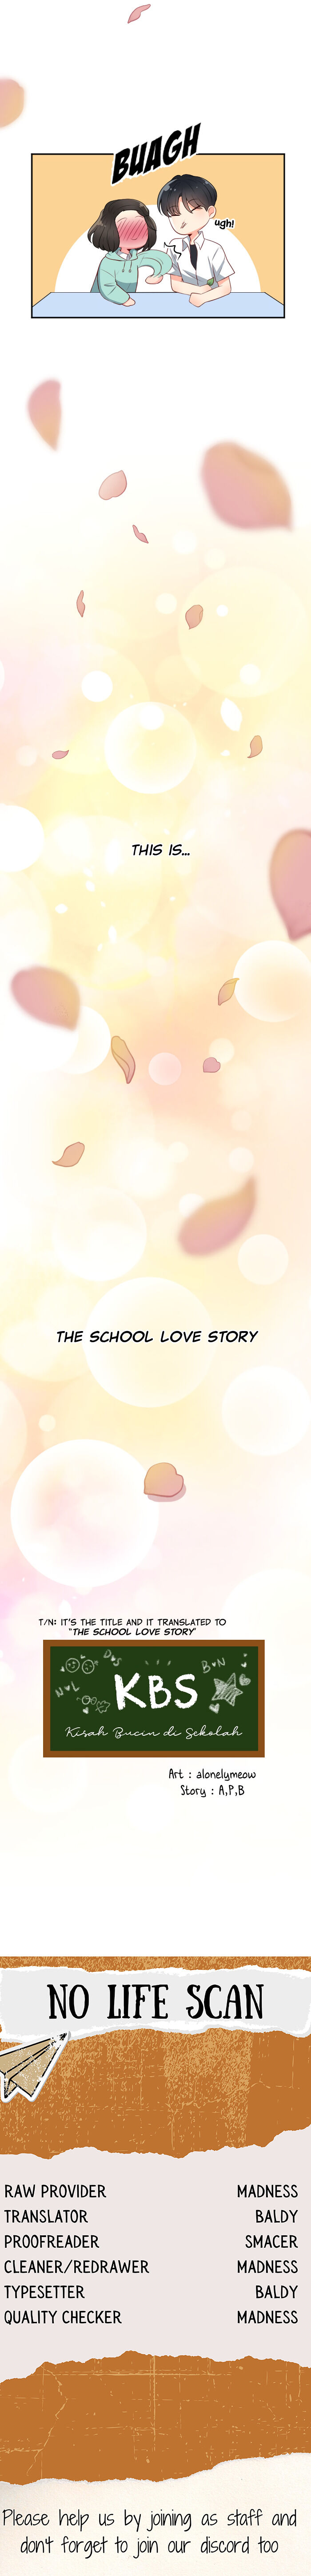 The School Love Story - Page 4